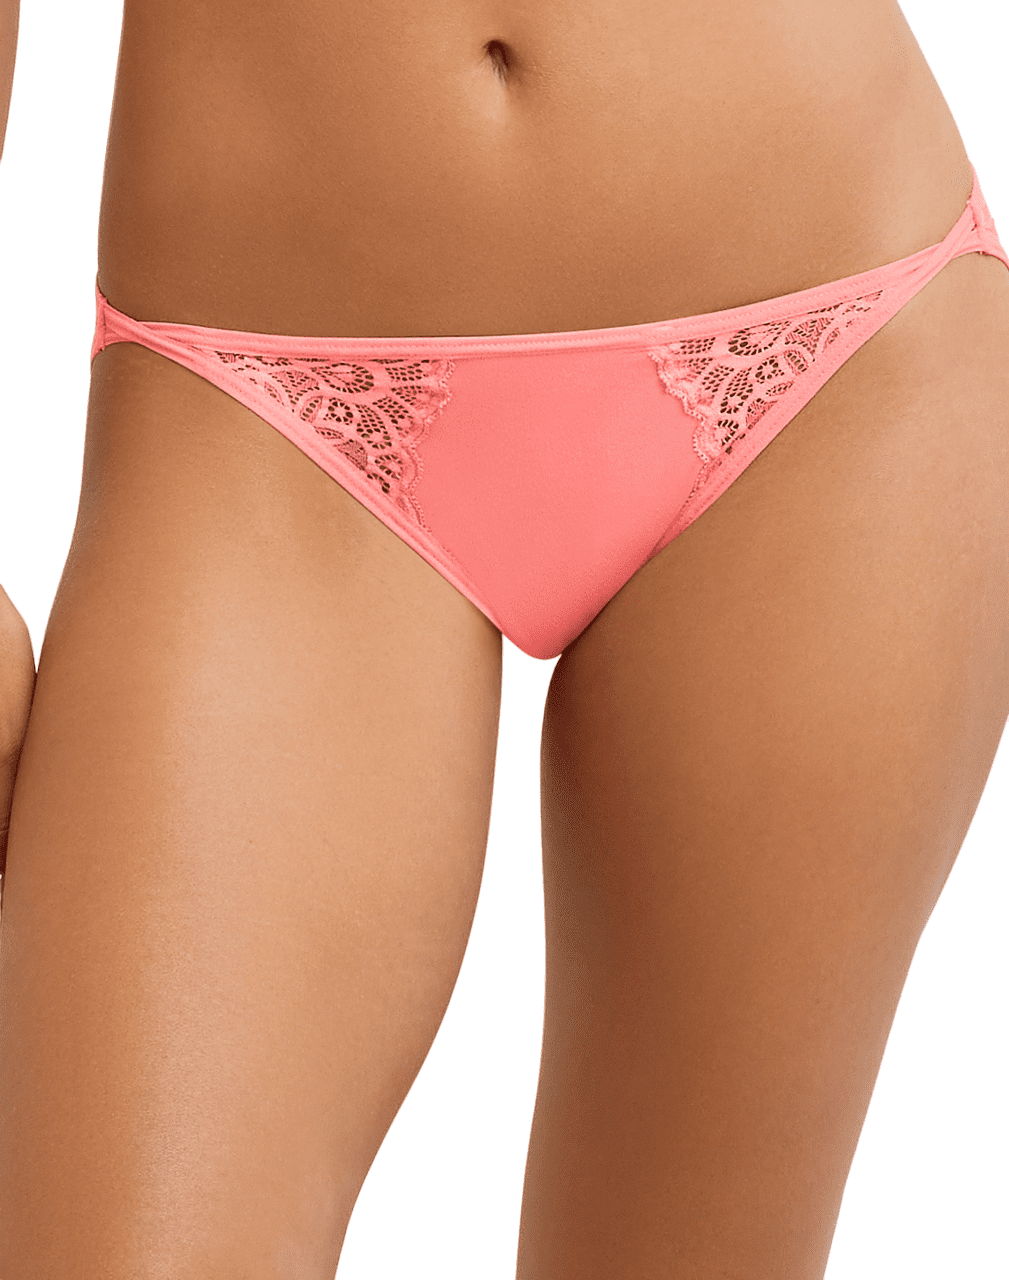 Maidenform Women's All Lace Thong Panty, Pink Ribbon Guava/Pink Cross Dye,  One Size